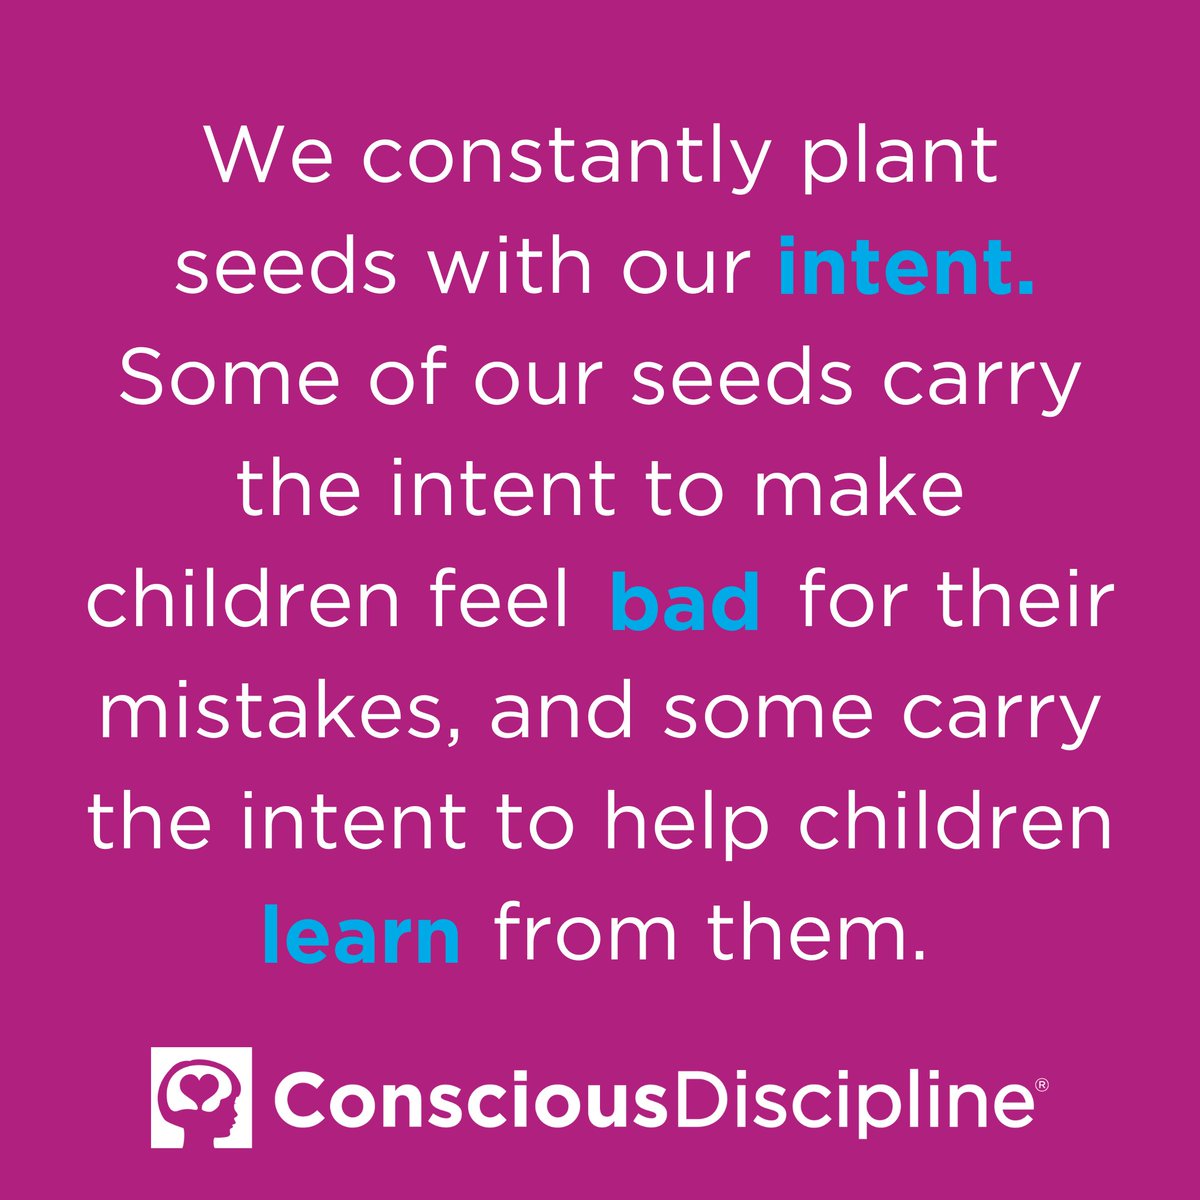 What are you planting with your intent? Learn more about the Power of Intention here: consciousdiscipline.com/seven-powers-p… #iHeartCD